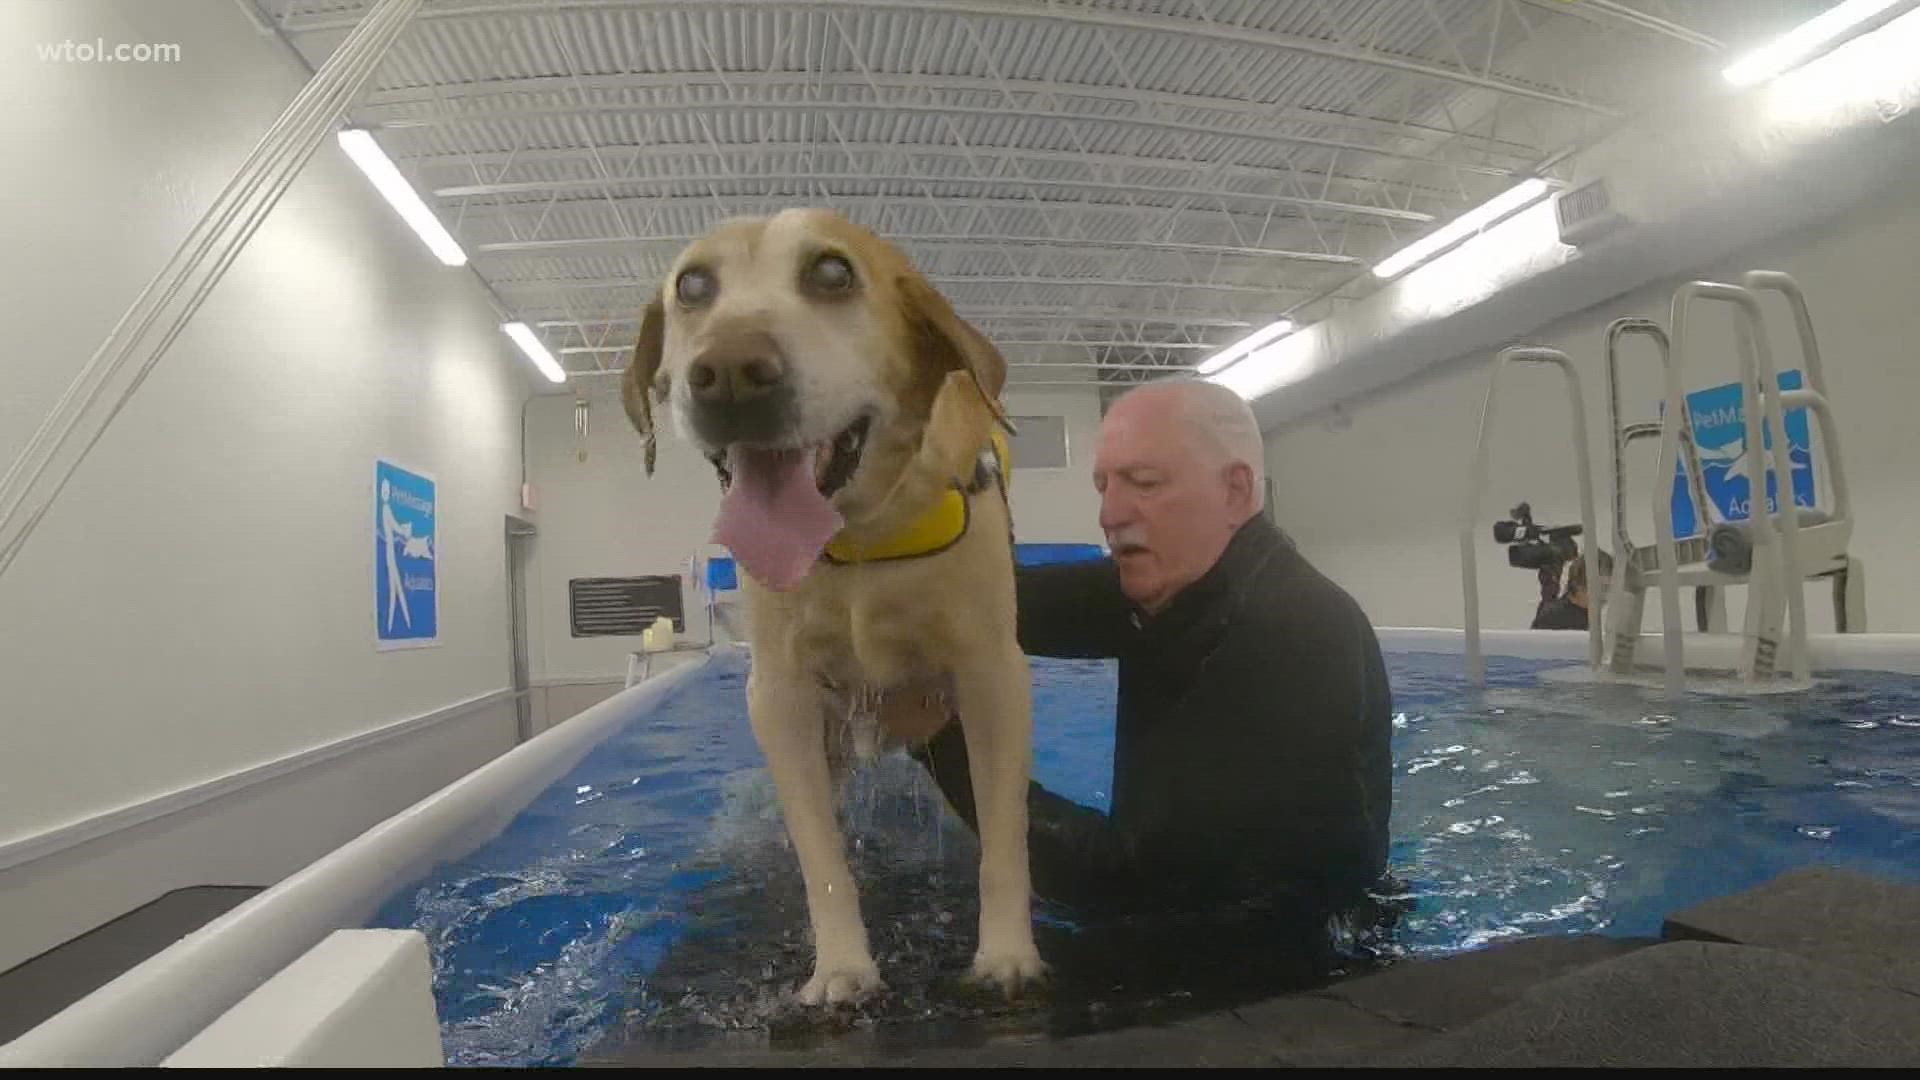 Deuce, a blind 11-year-old labrador, is a regular at Pet Massage Aquatics. The facility allows pets and people to come and experience therapeutic aquatic massage.